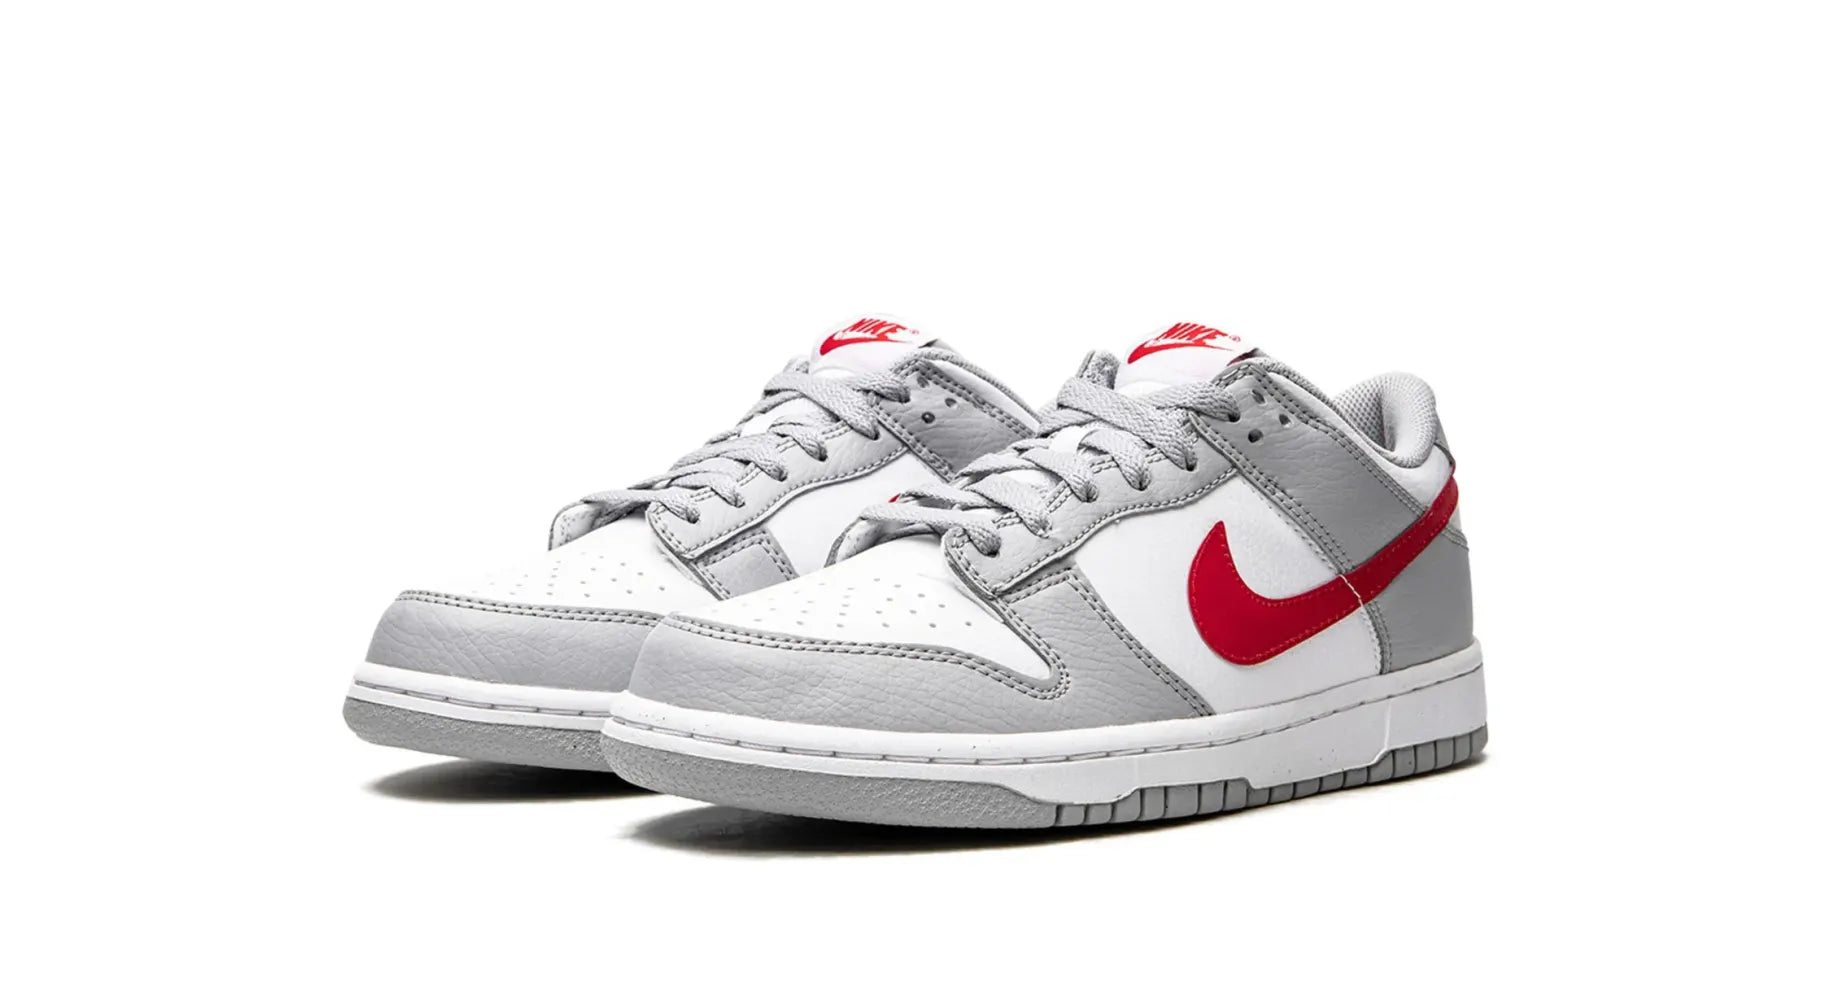 Nike Dunk Low White Wolf Grey University Red (GS)